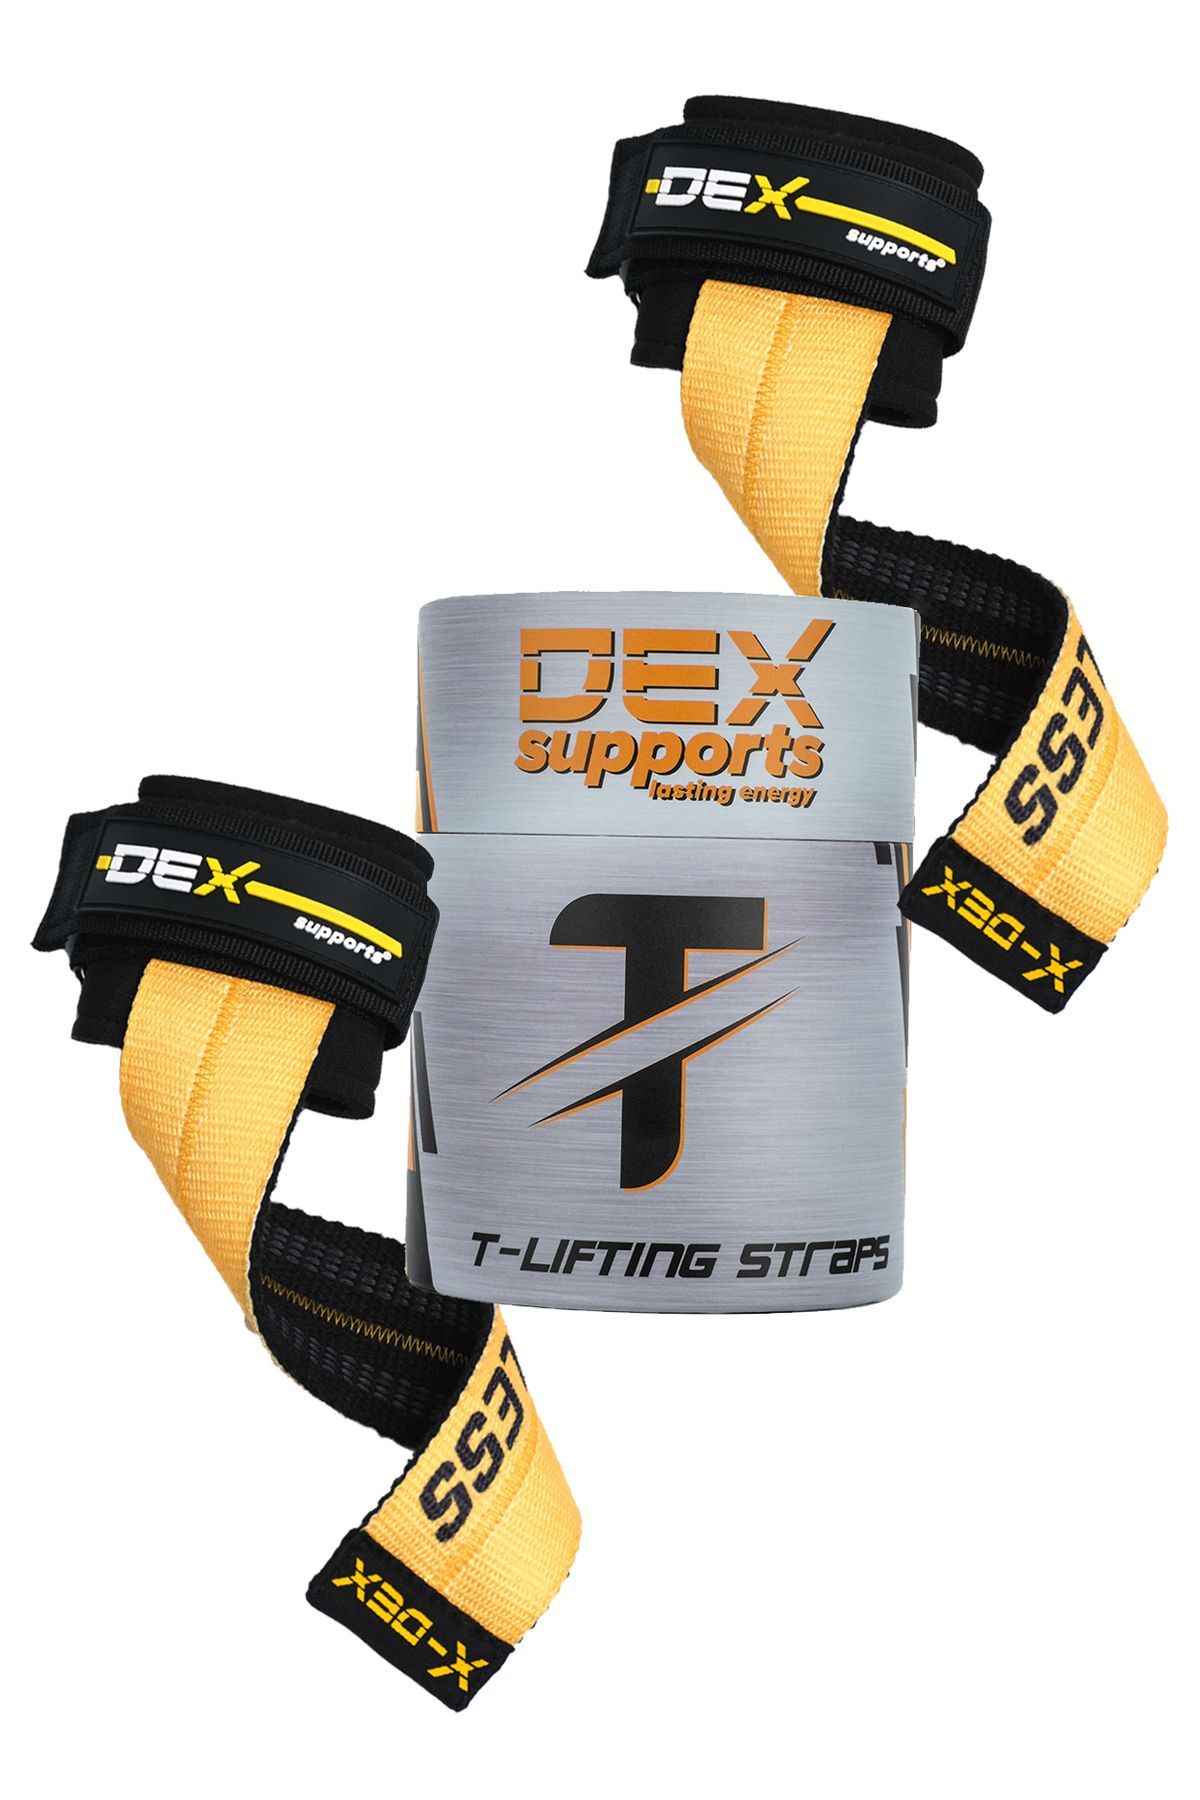 Dex Supports Lasting Energy T-grips Lifting Straps